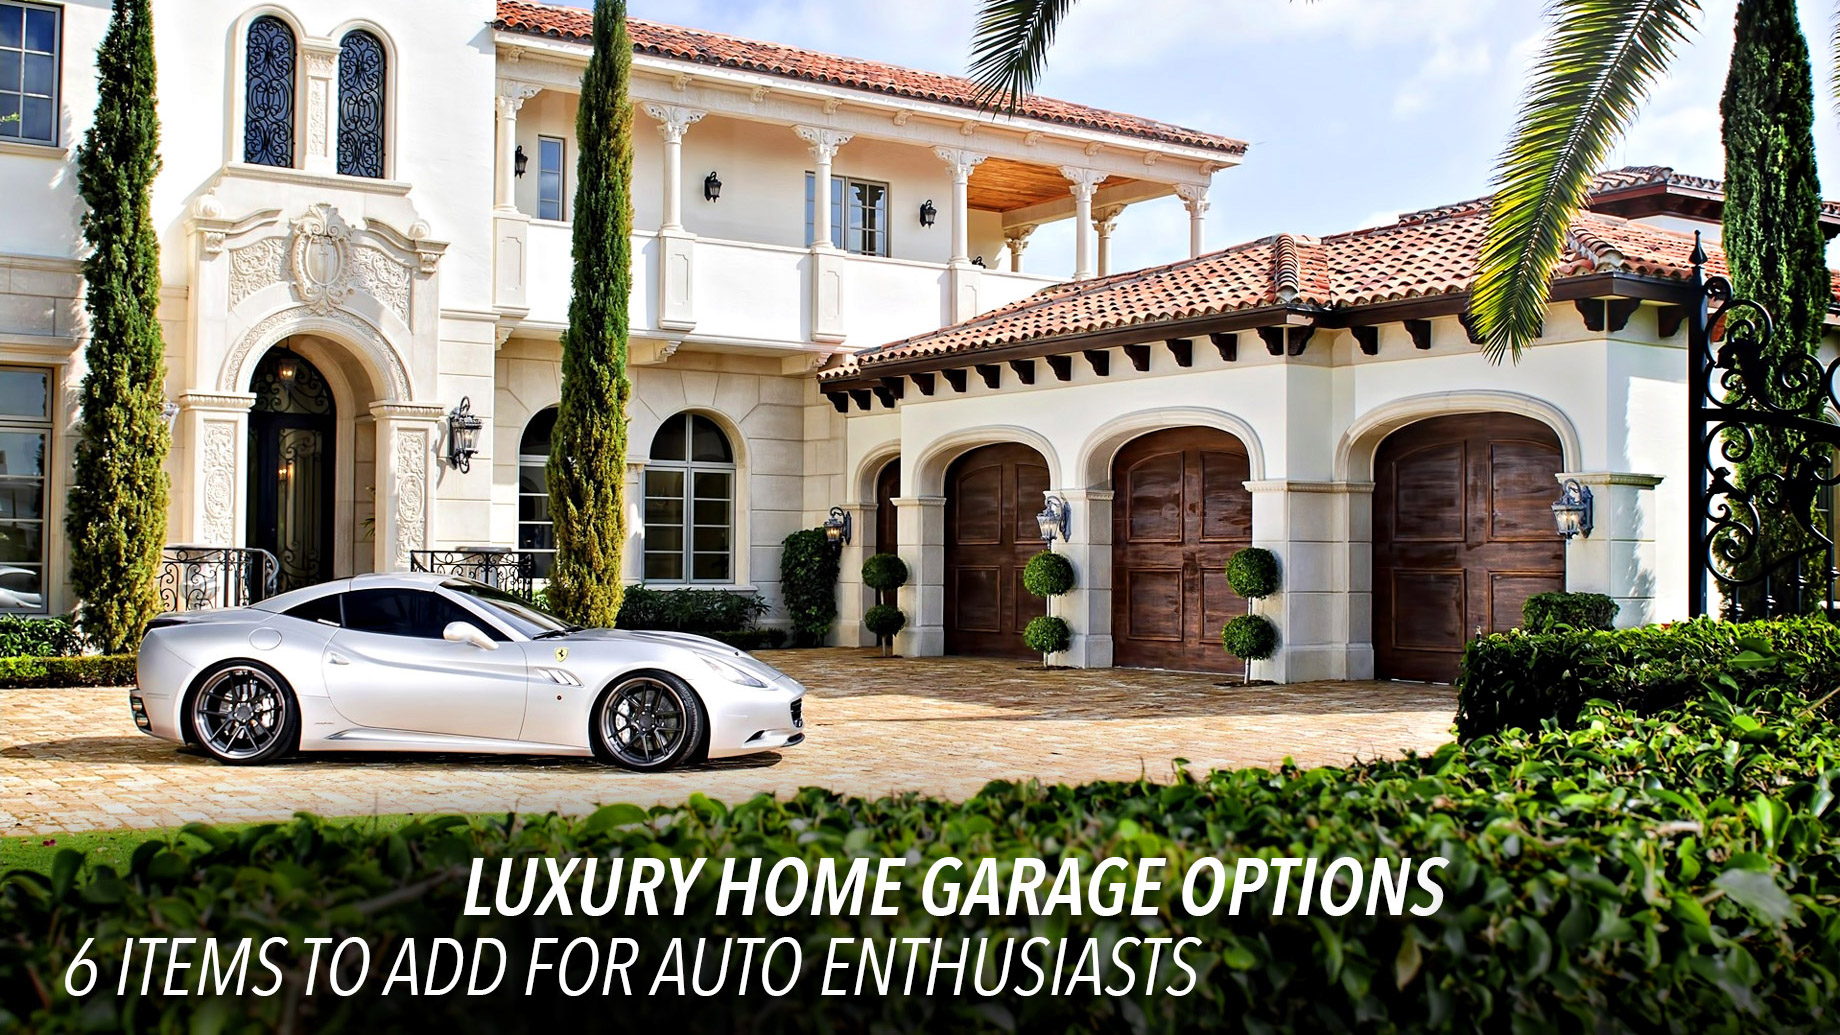 Luxury Home Garage Options - 6 Items to Add for Auto Enthusiasts